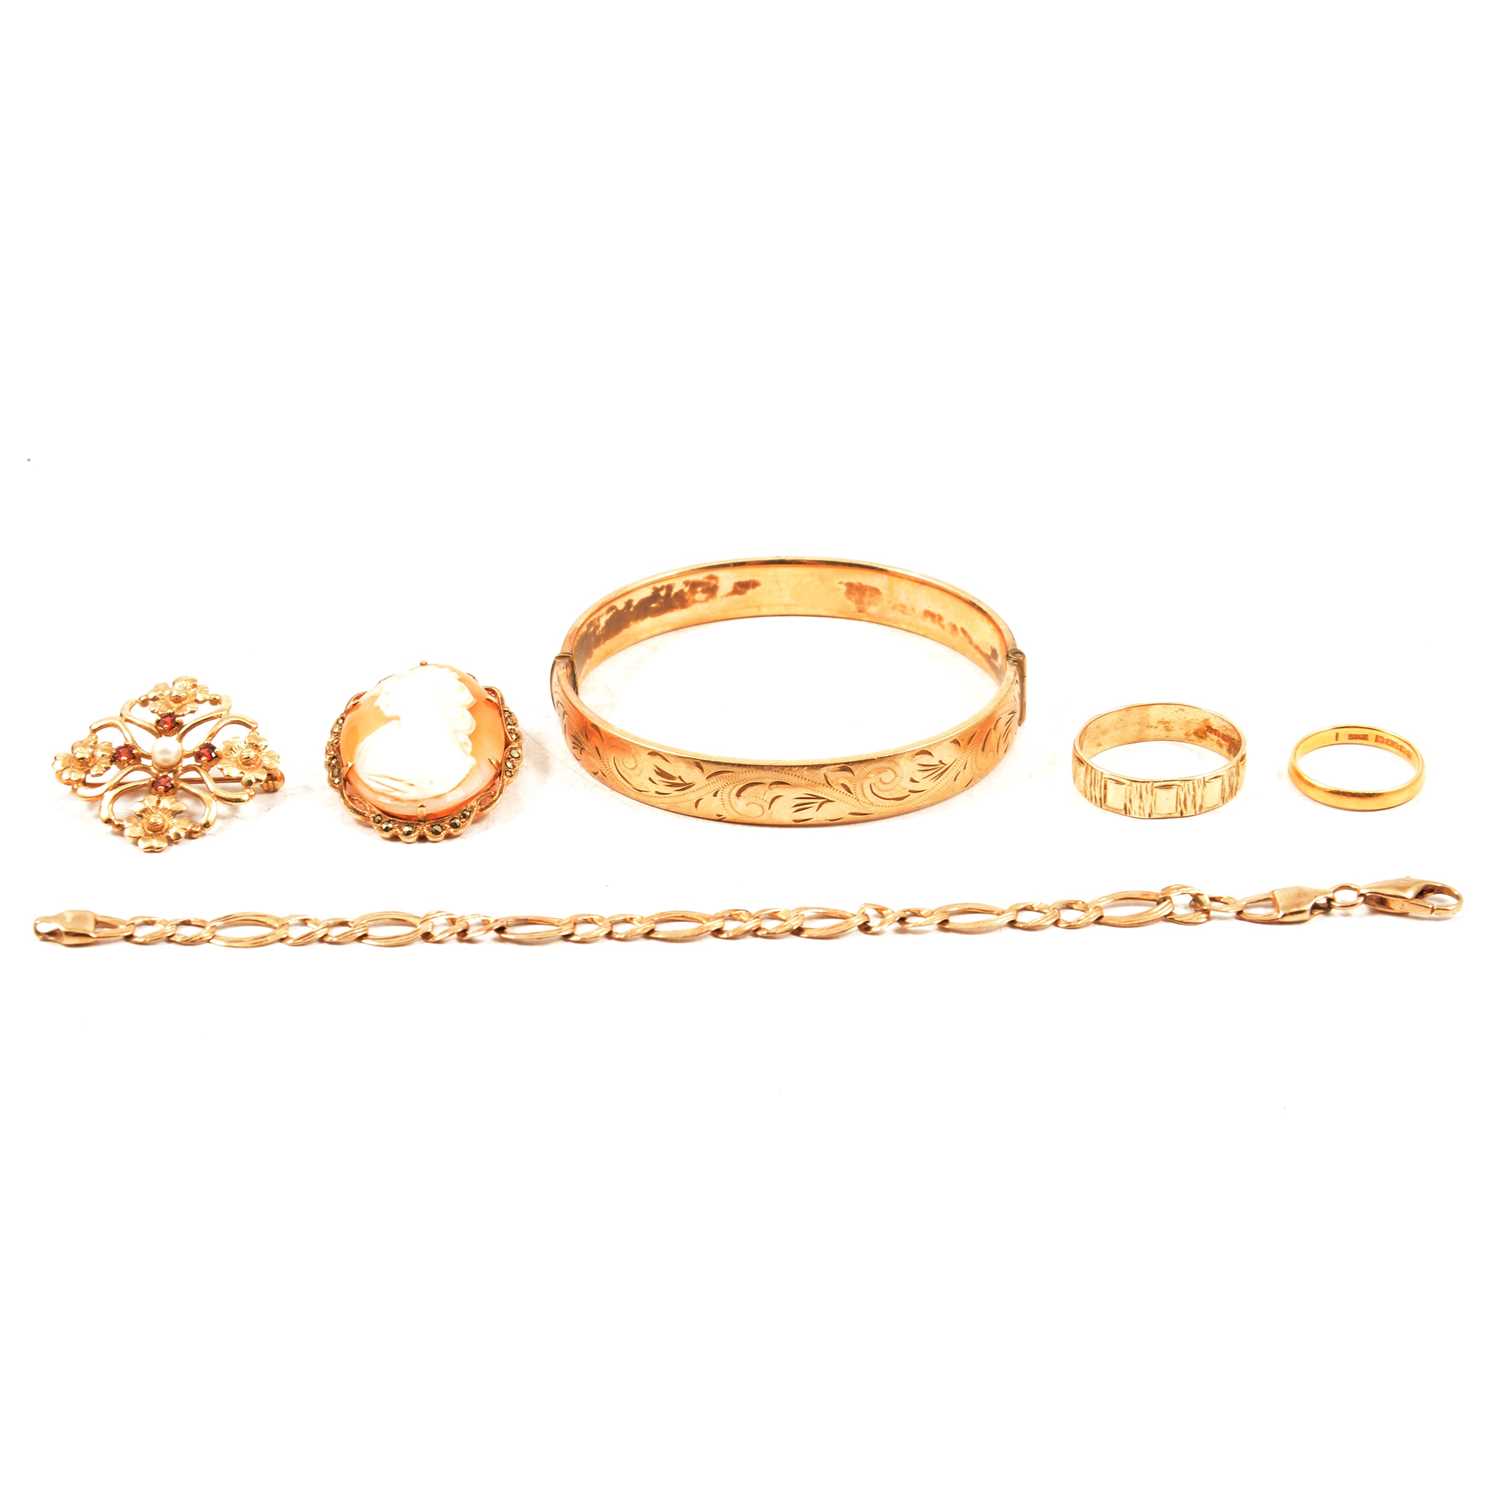 Lot 141 - Two wedding rings, gold bracelet, cameo brooch, gemset brooch and gold-plated bangle.